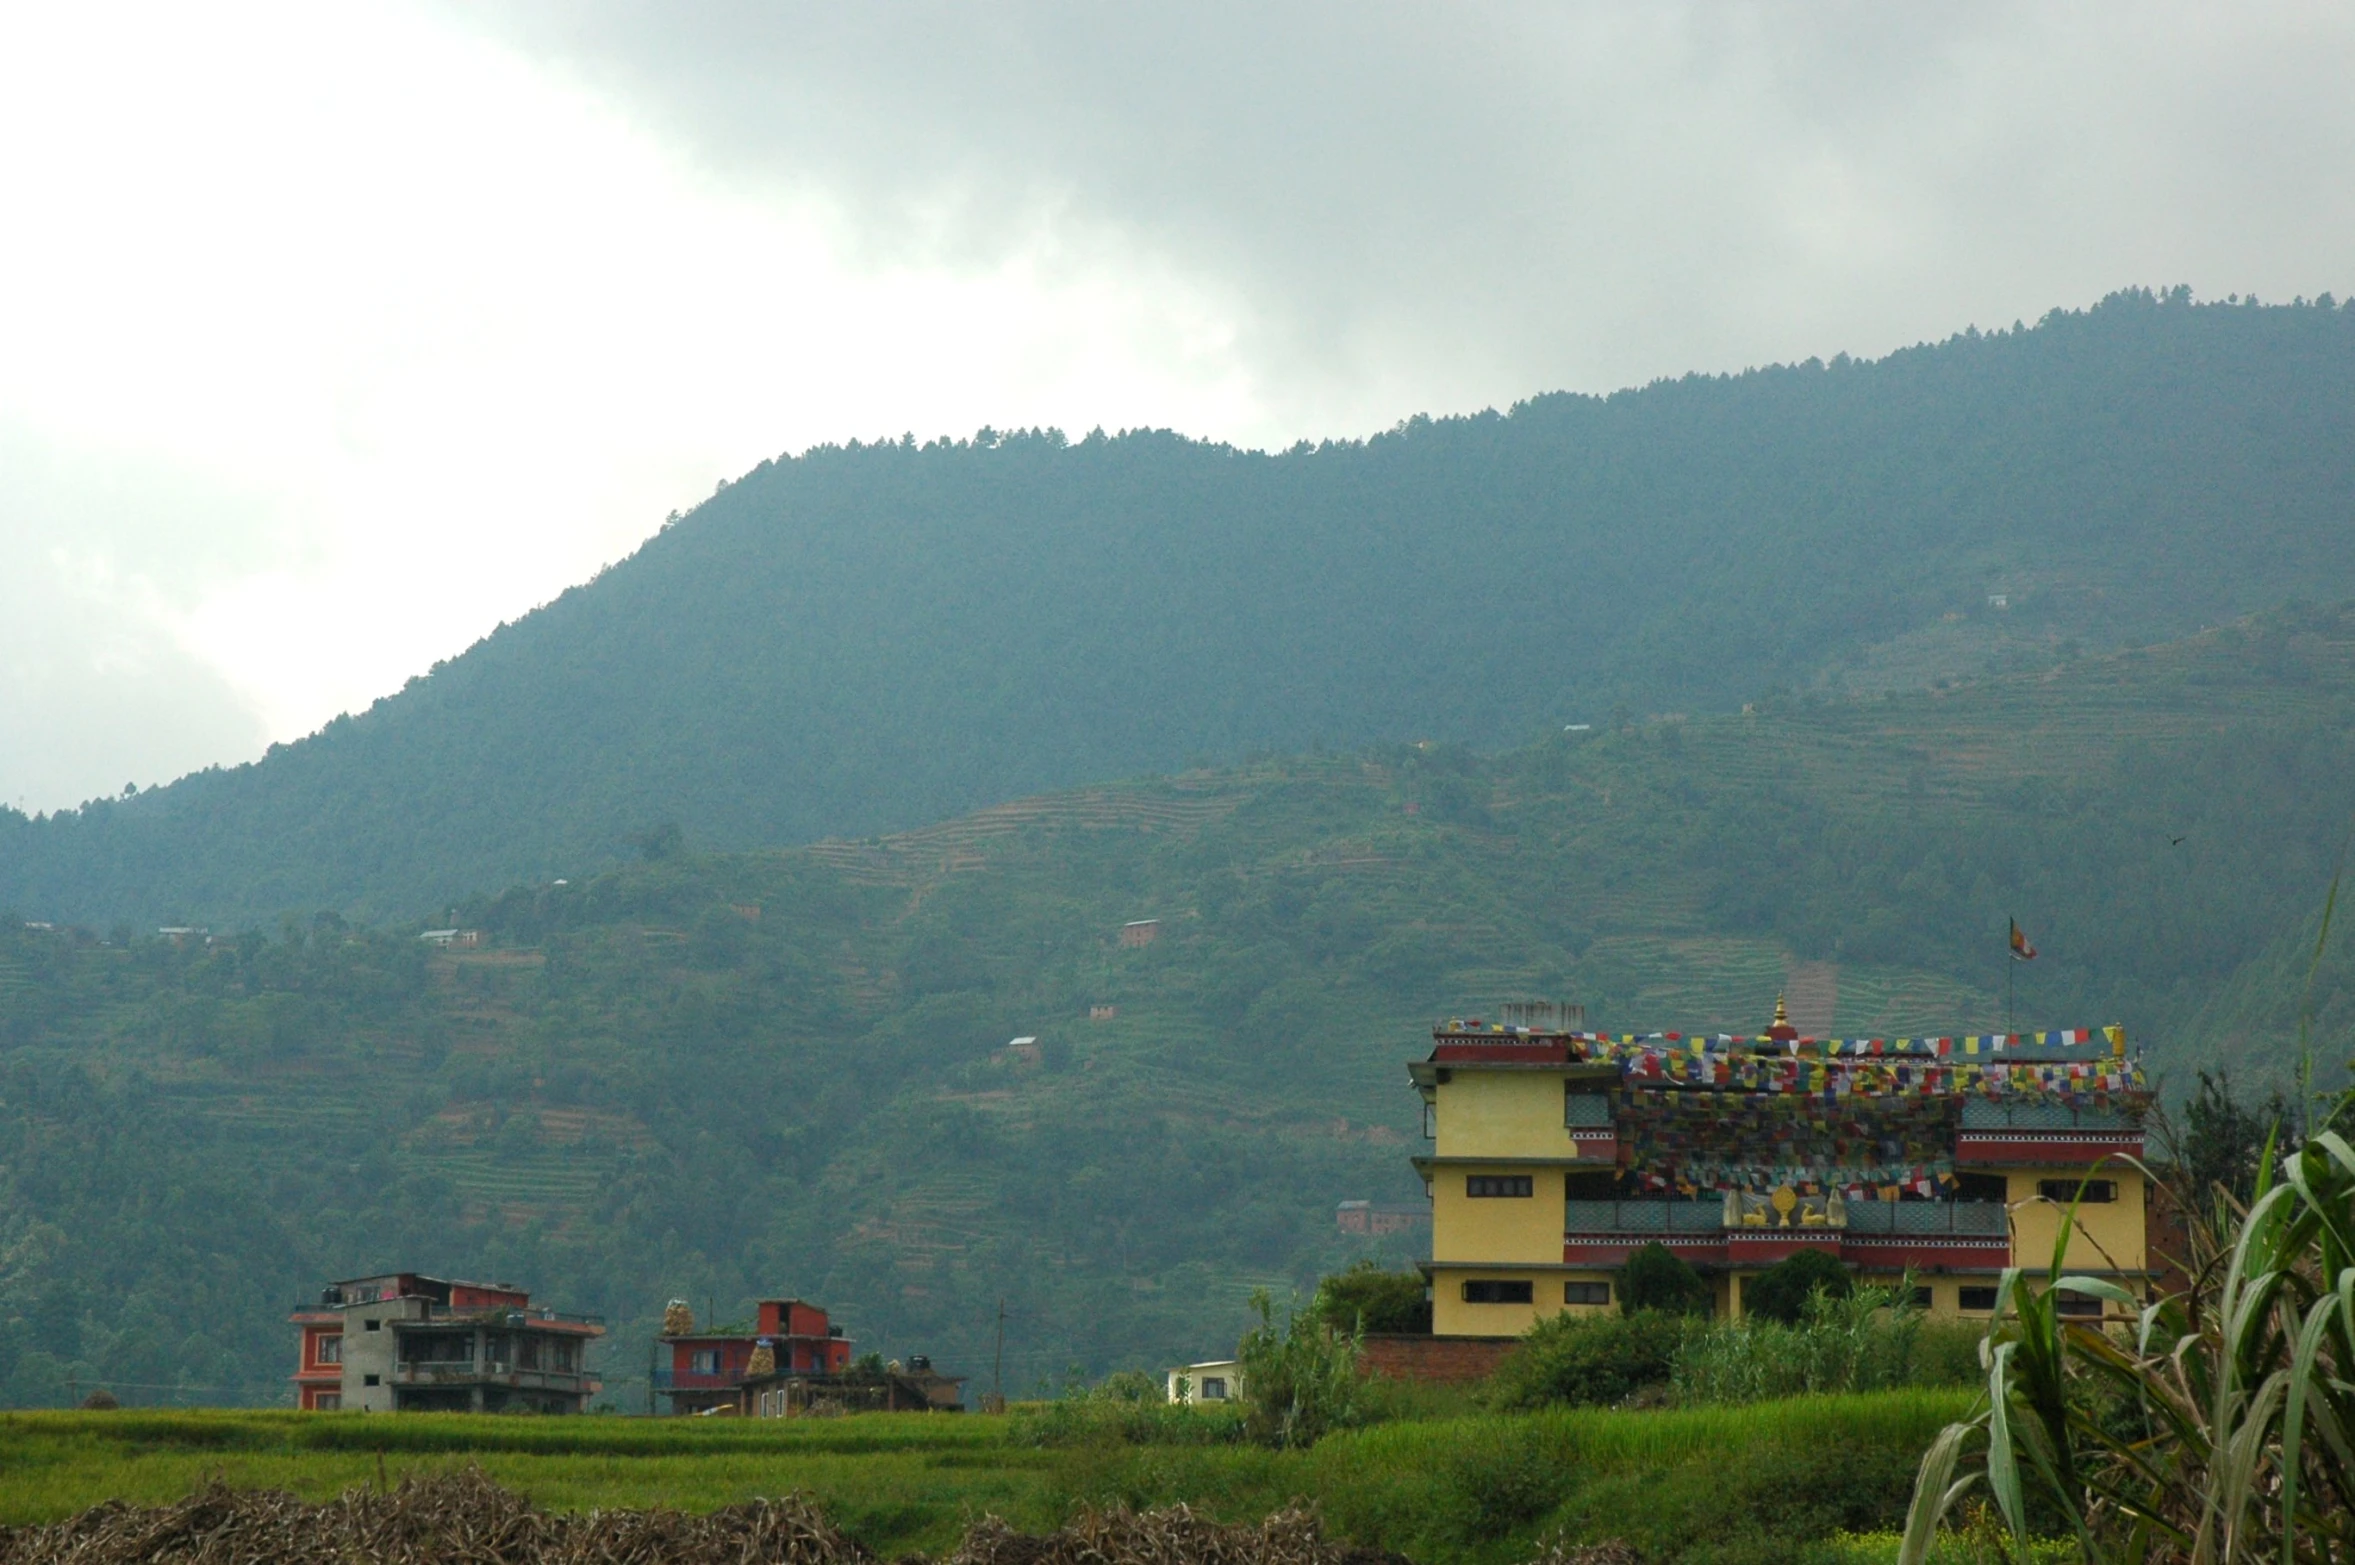 a view of a mountain side with buildings